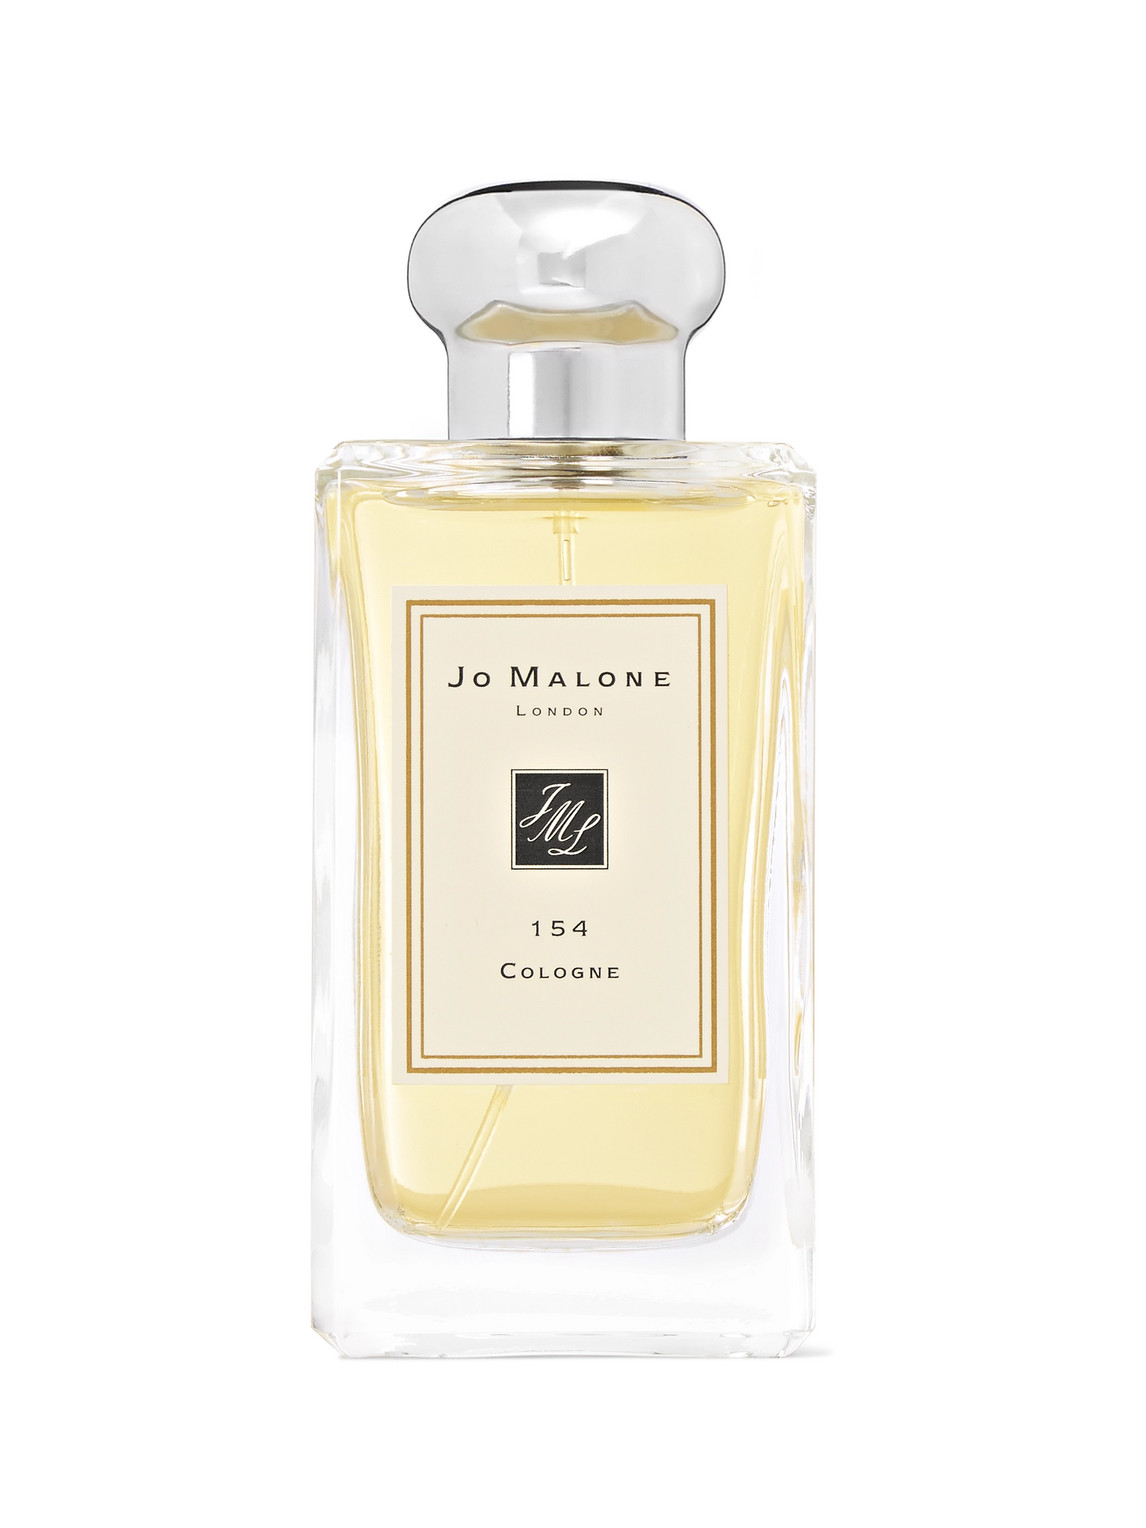 Jo Malone London 154 Cologne, 100ml In Colorless